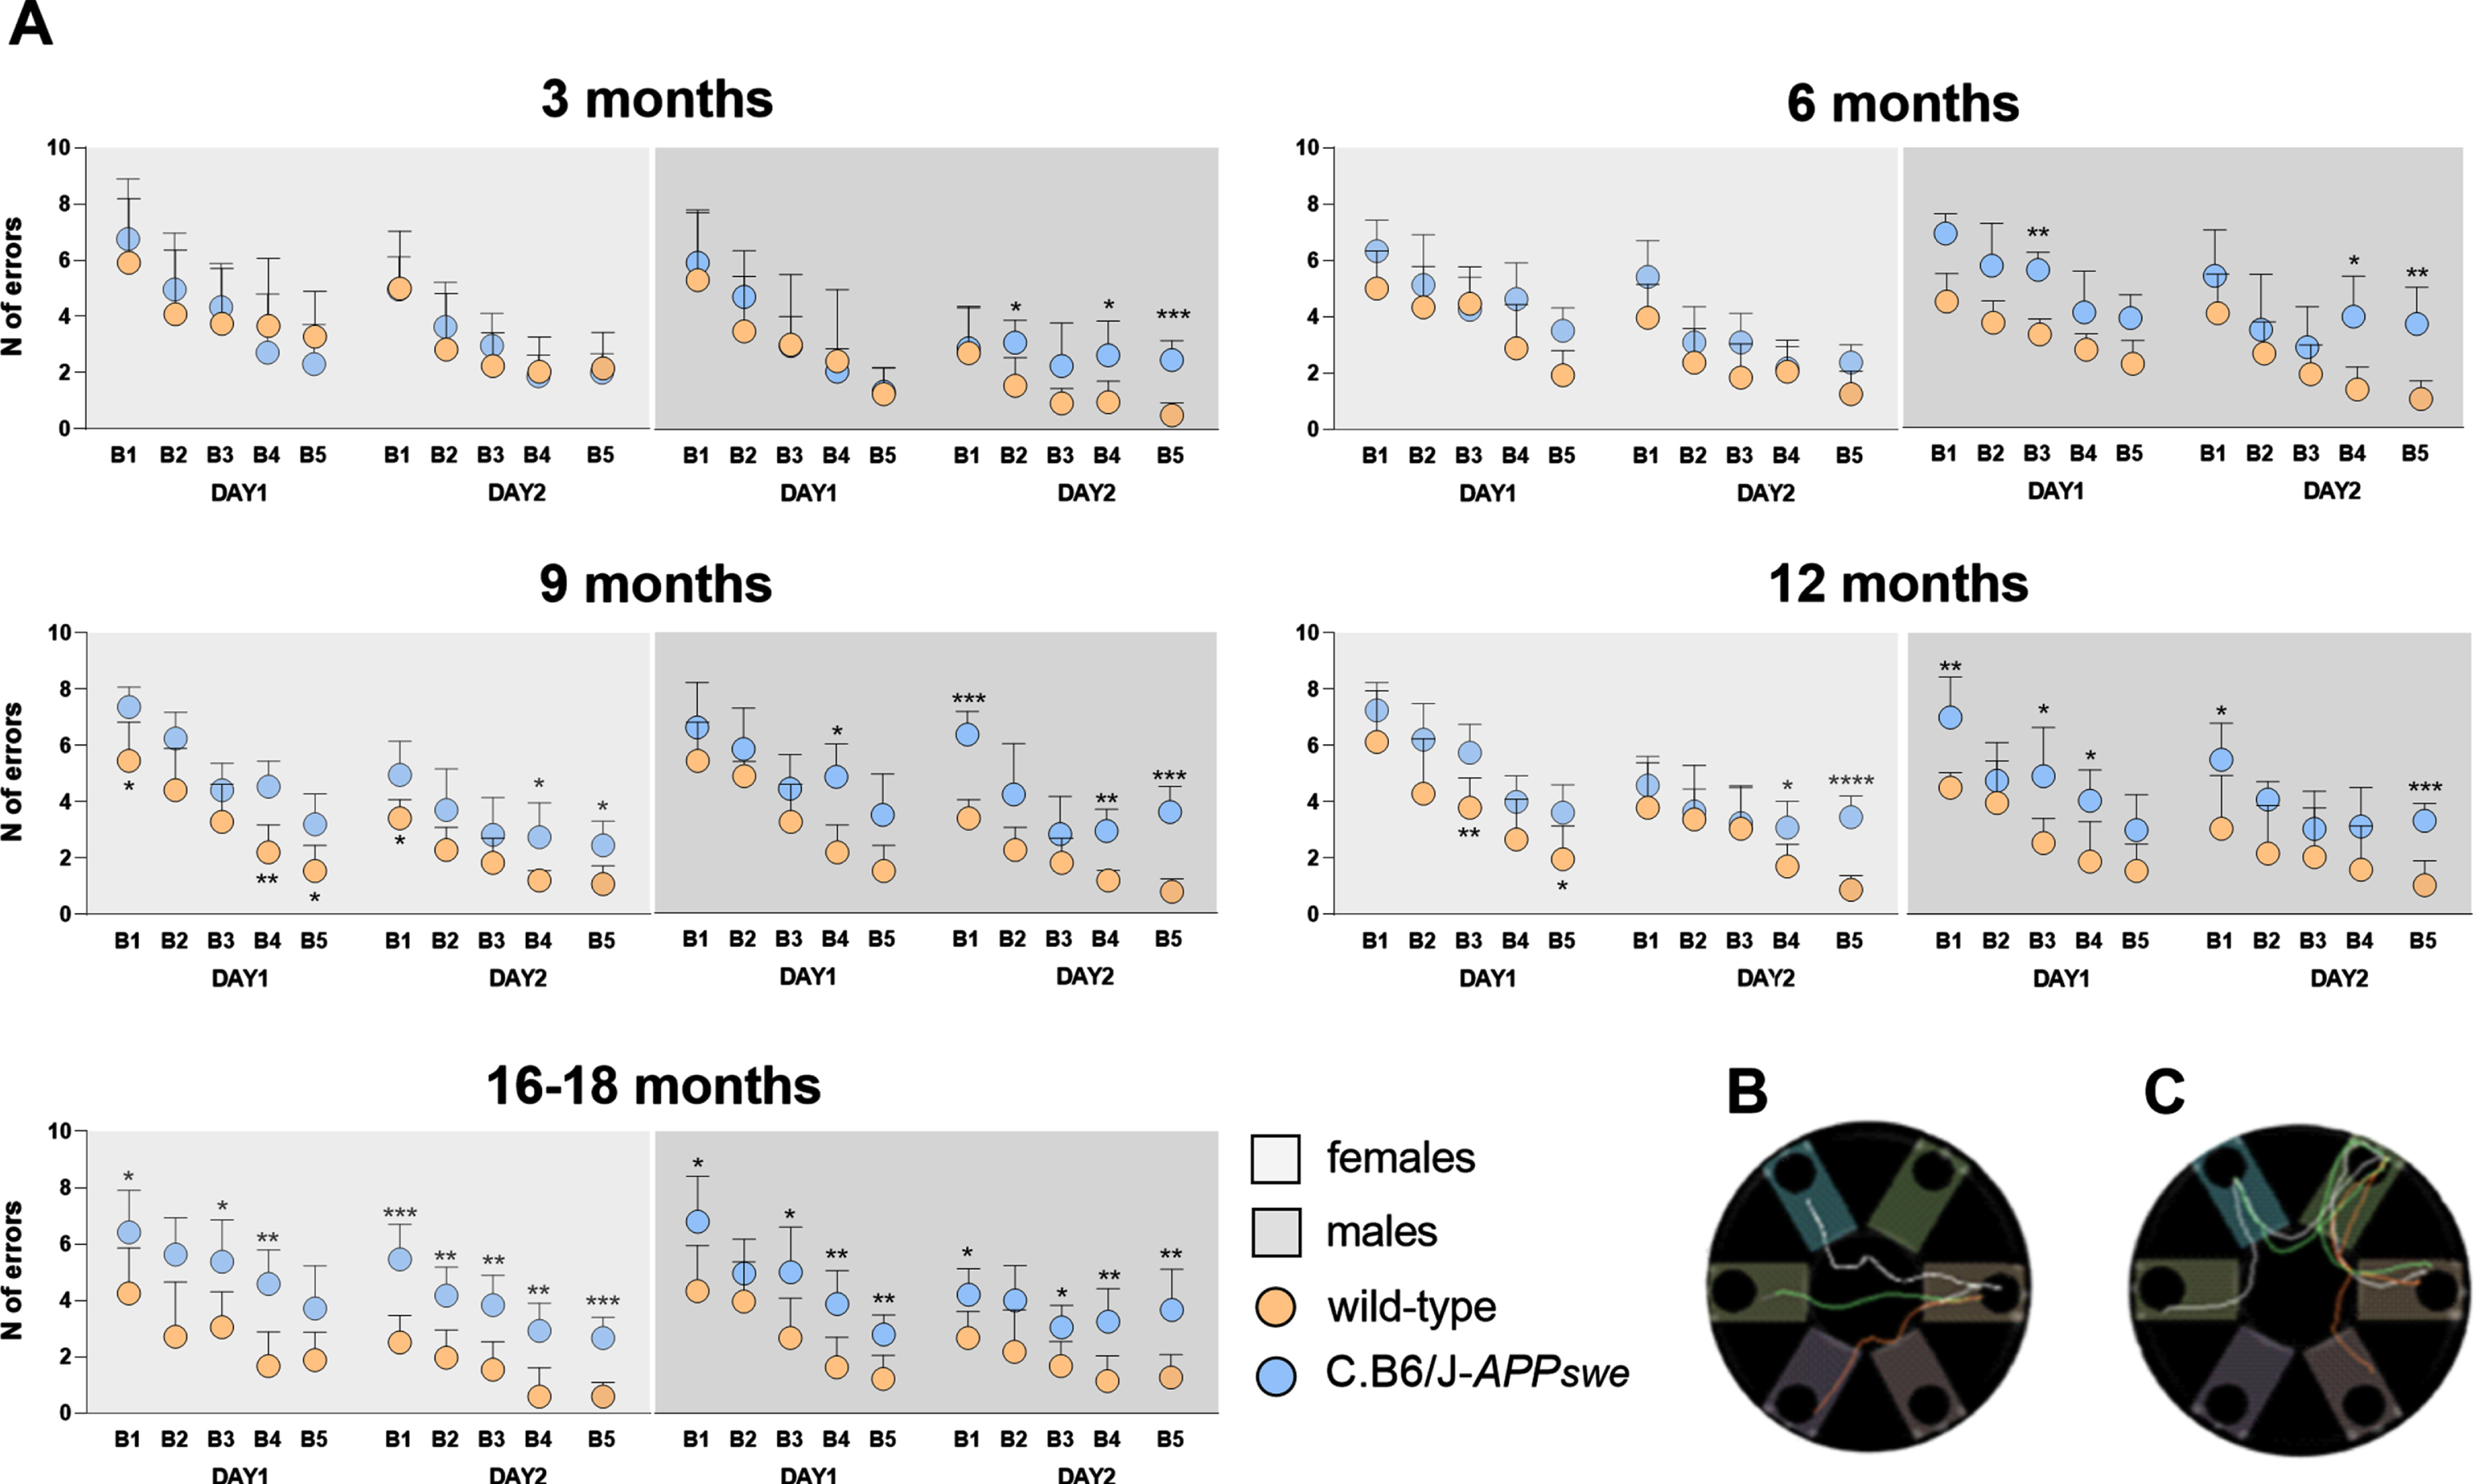 C.B6/J-APPswe mice have spatial working memory deficits, whose onset is earlier in males than females and worse during aging. A) Comparing the performances in the Radial Arm Water Maze test of wild-type and C.B6/J-APPswe females, no differences were found at 3 and 6 months of age, but then congenic mice started to make a significantly higher number of errors, worsening to 16–18 months when the significance was reached almost in every block of both days. C.B6/J-APPswe males compared to age-matched wild-type males made a significantly higher number of errors in few blocks already at 3 months of age, then worsening the performance till 16–18 months when the significance was reached almost in every block of both days. B, C) Images reported the tracking profiles during the last three releases of the task. In B is a good performer who made no errors to find the platform; in C is a bad performer who tried to enter several arms before finding the goal one. Eight male and eight female animals of each genotype were analyzed per age point. Two-way ANOVA for repeated measures and Tukey’s test. *p < 0.05, **p < 0.01, ***p < 0.001 [C.B6/J-APPswe versus age-matched wild-type mice]. B1, block 1; B2, block 2; B3, block 3; B4, block 4; B5, block 5.